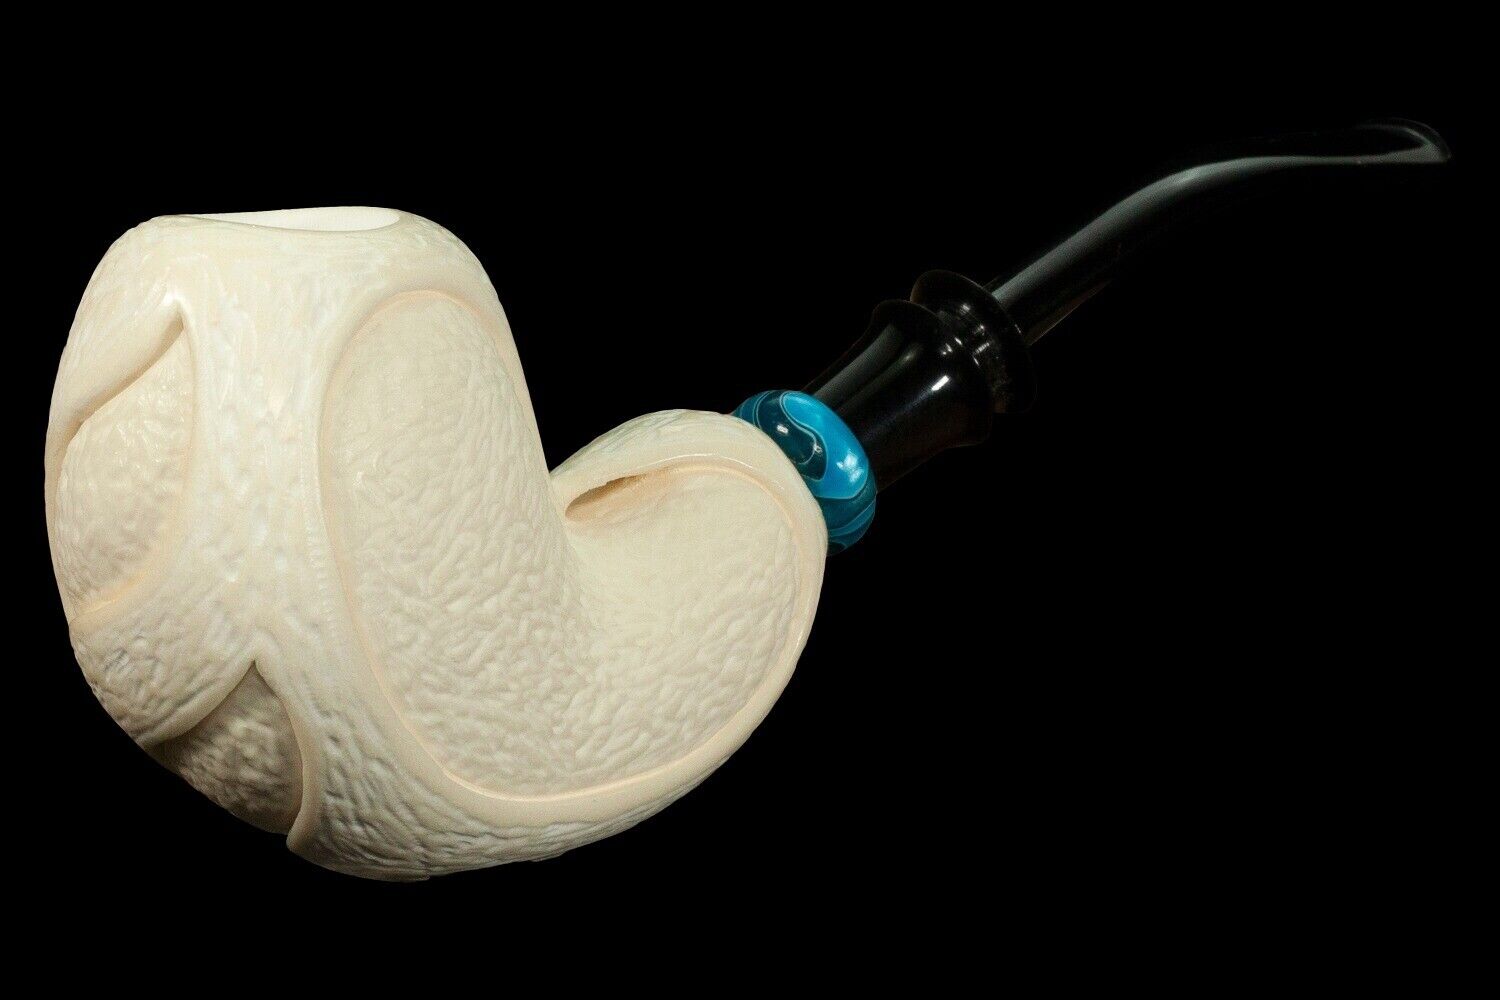 Large Bowl Freehand Pipe BLOCK MEERSCHAUM-NEW-HAND CARVED W Case#446